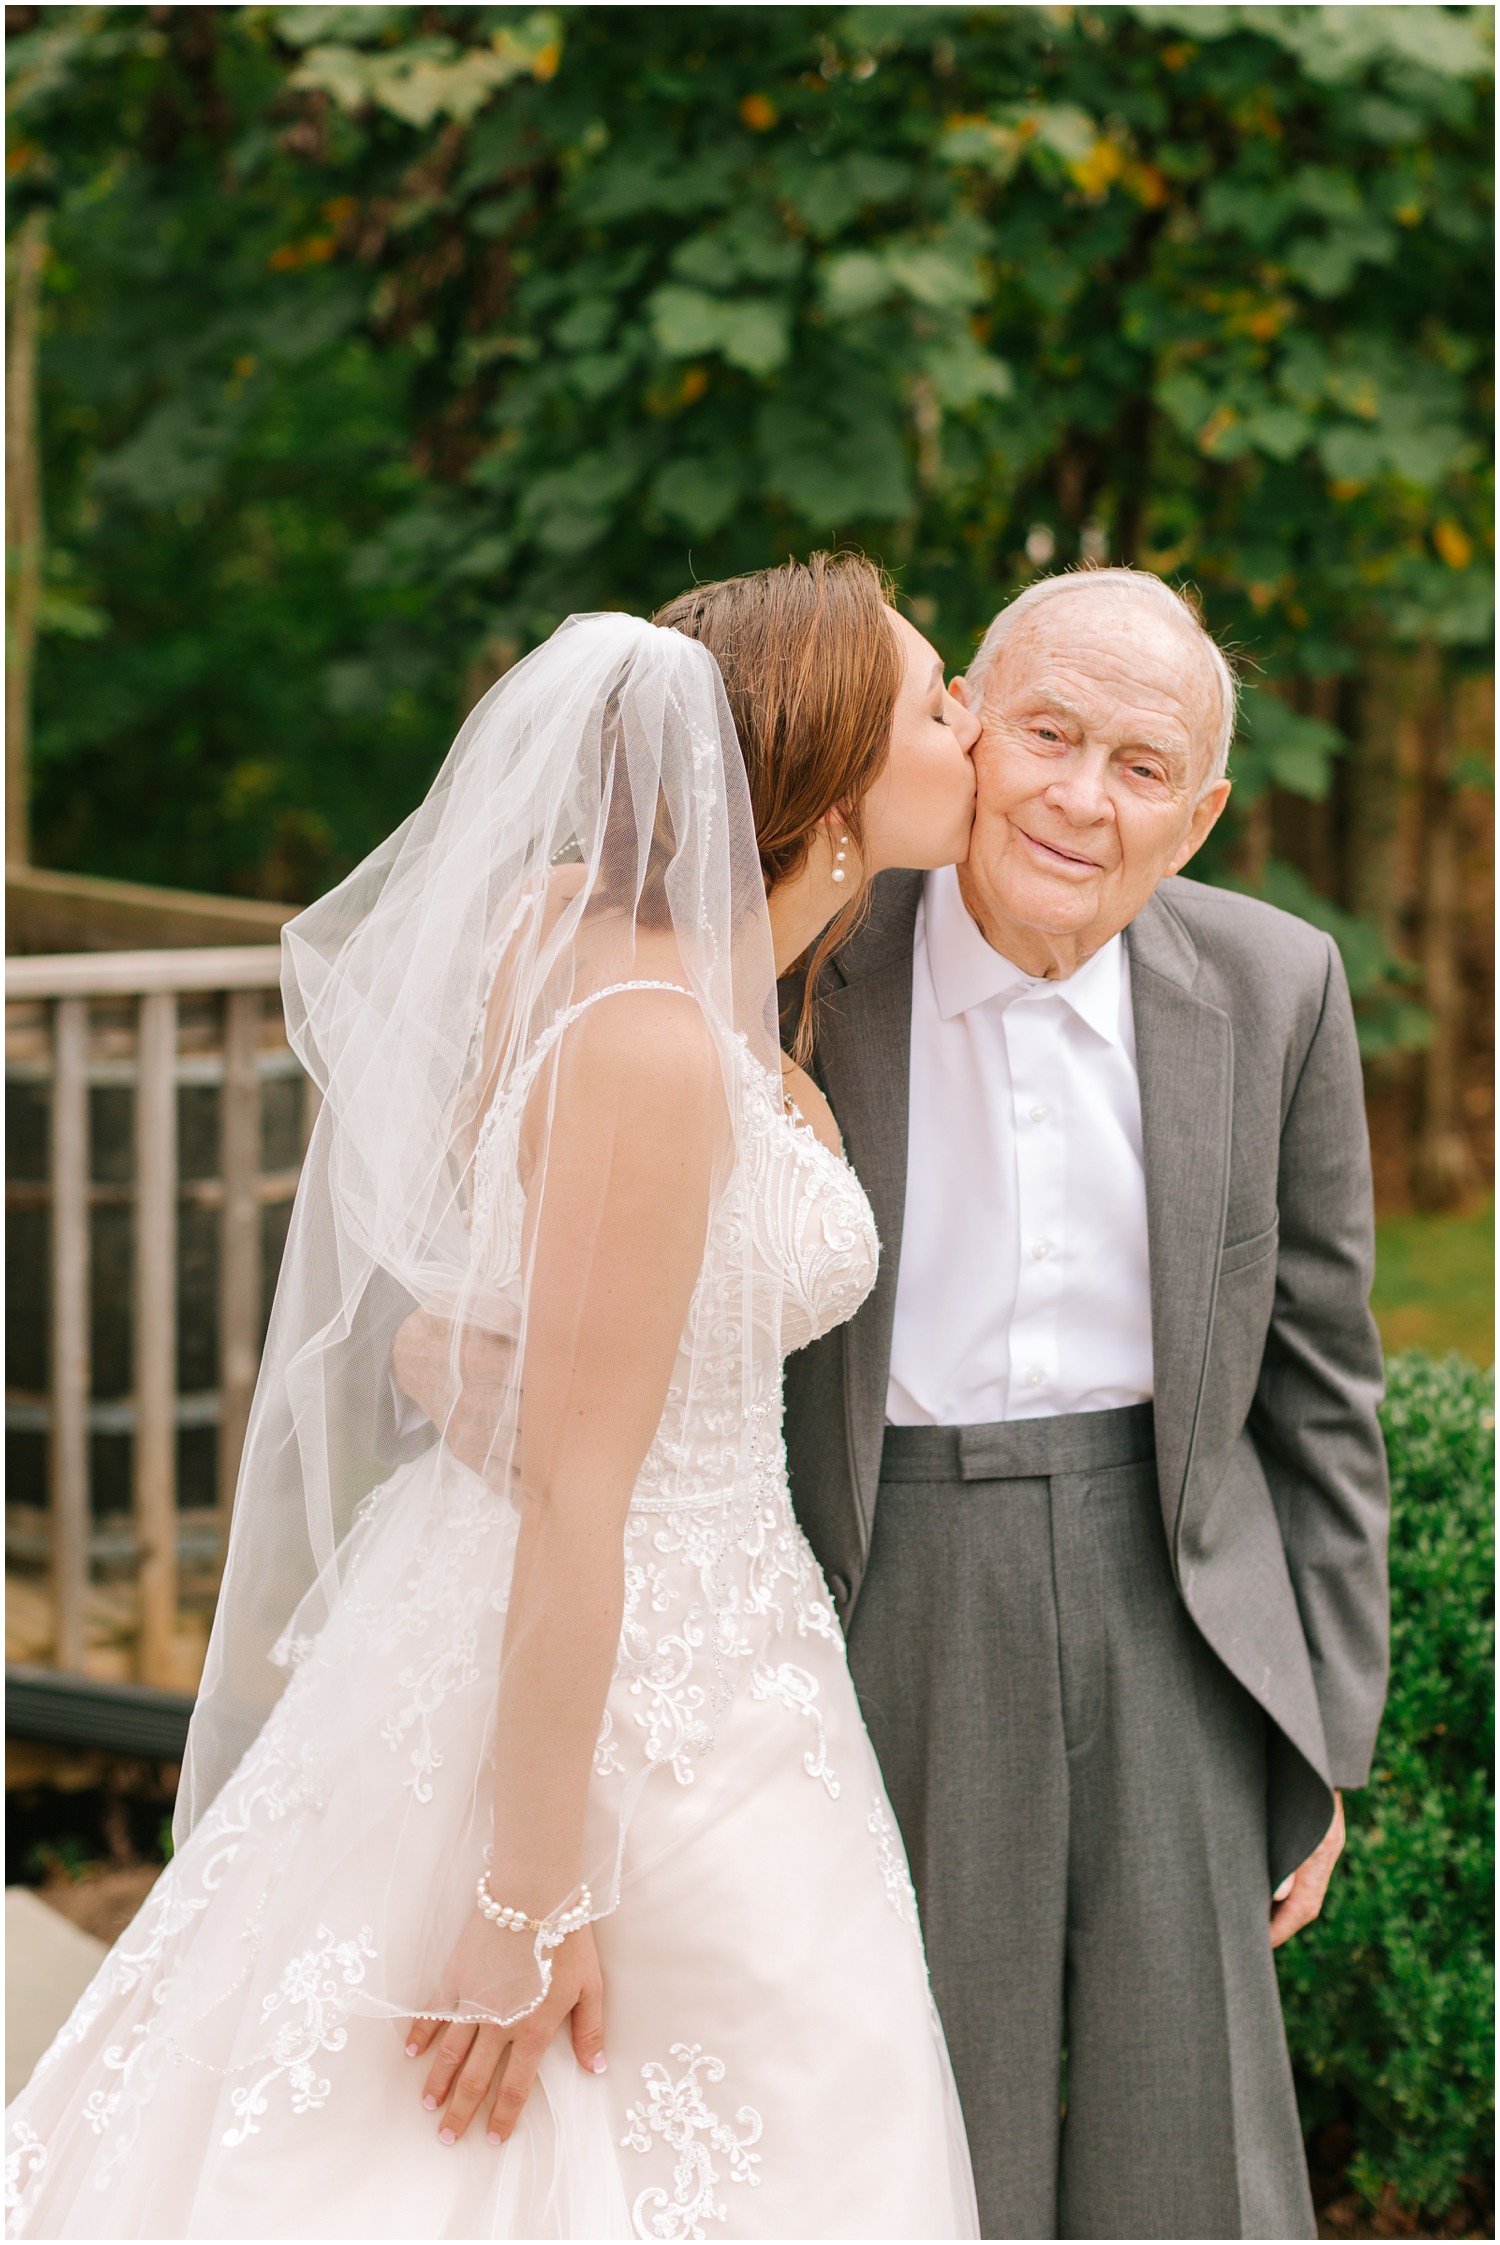 bride kisses grandfather on the cheek before wedding day